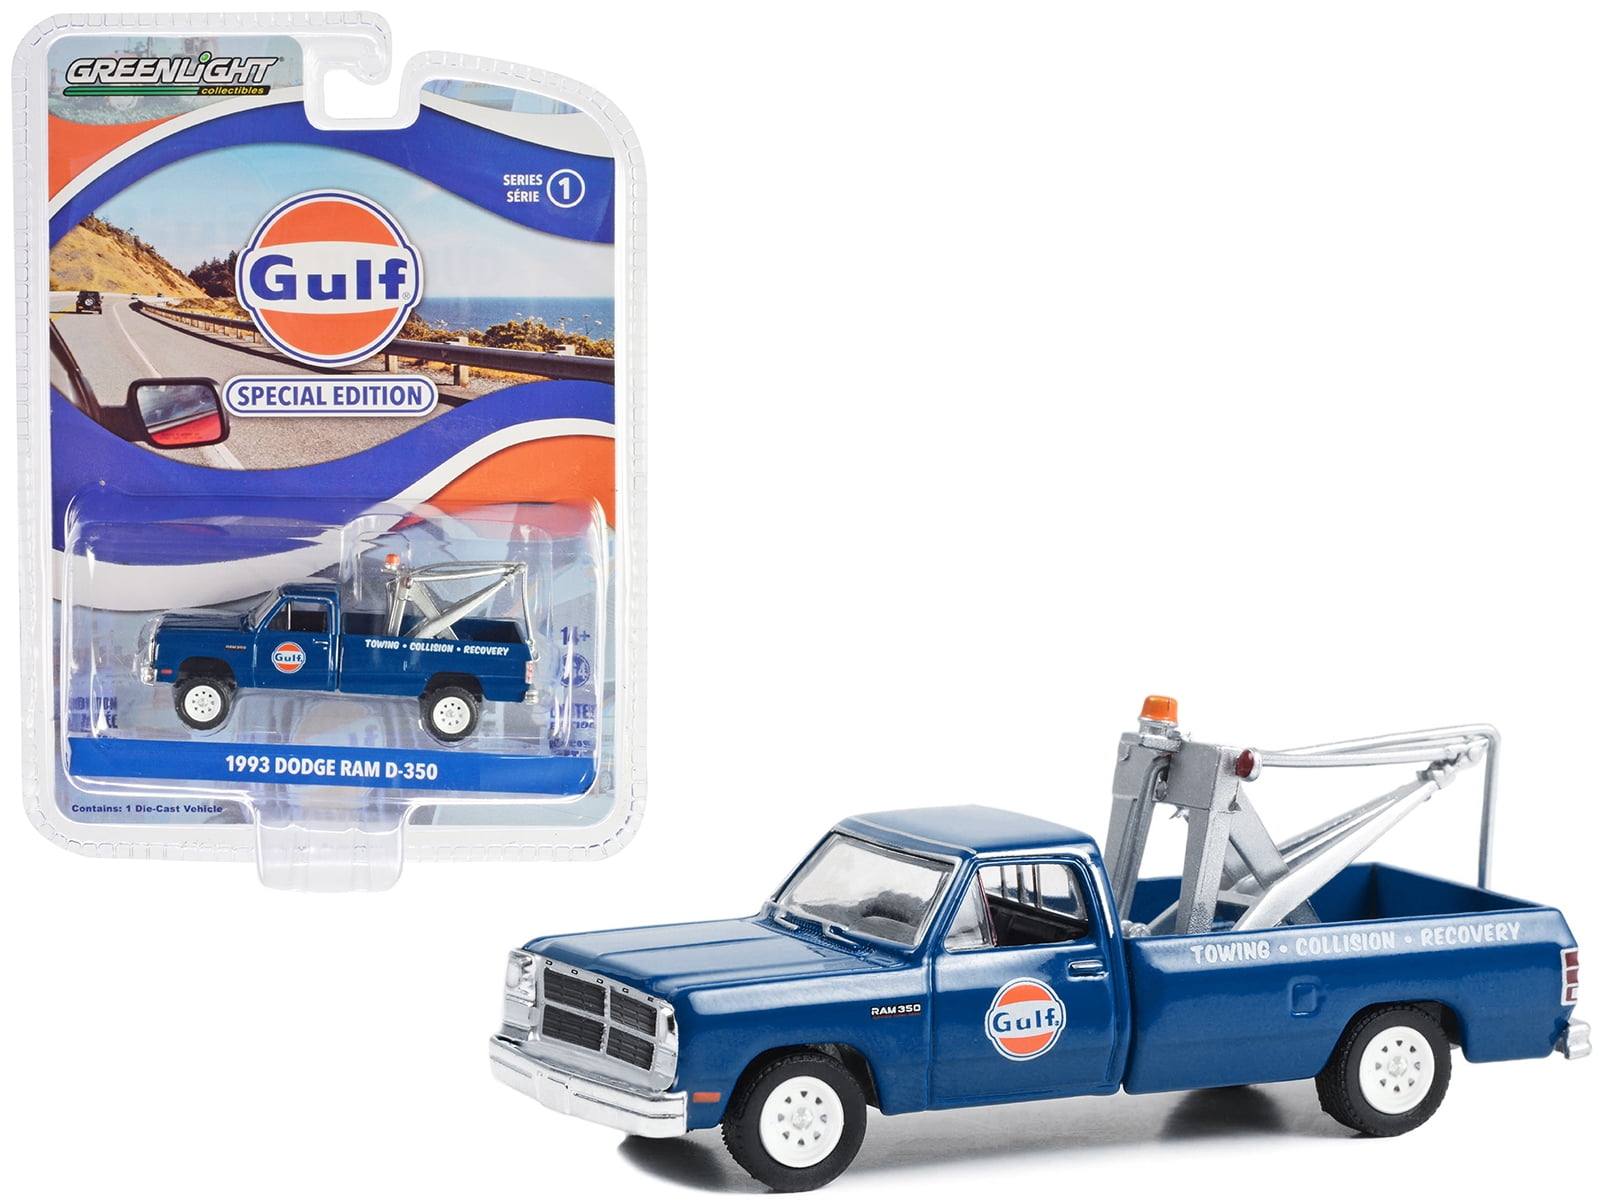 1/64 1993 DODGE RAM D-350 - GULF (SPECIAL EDITION)